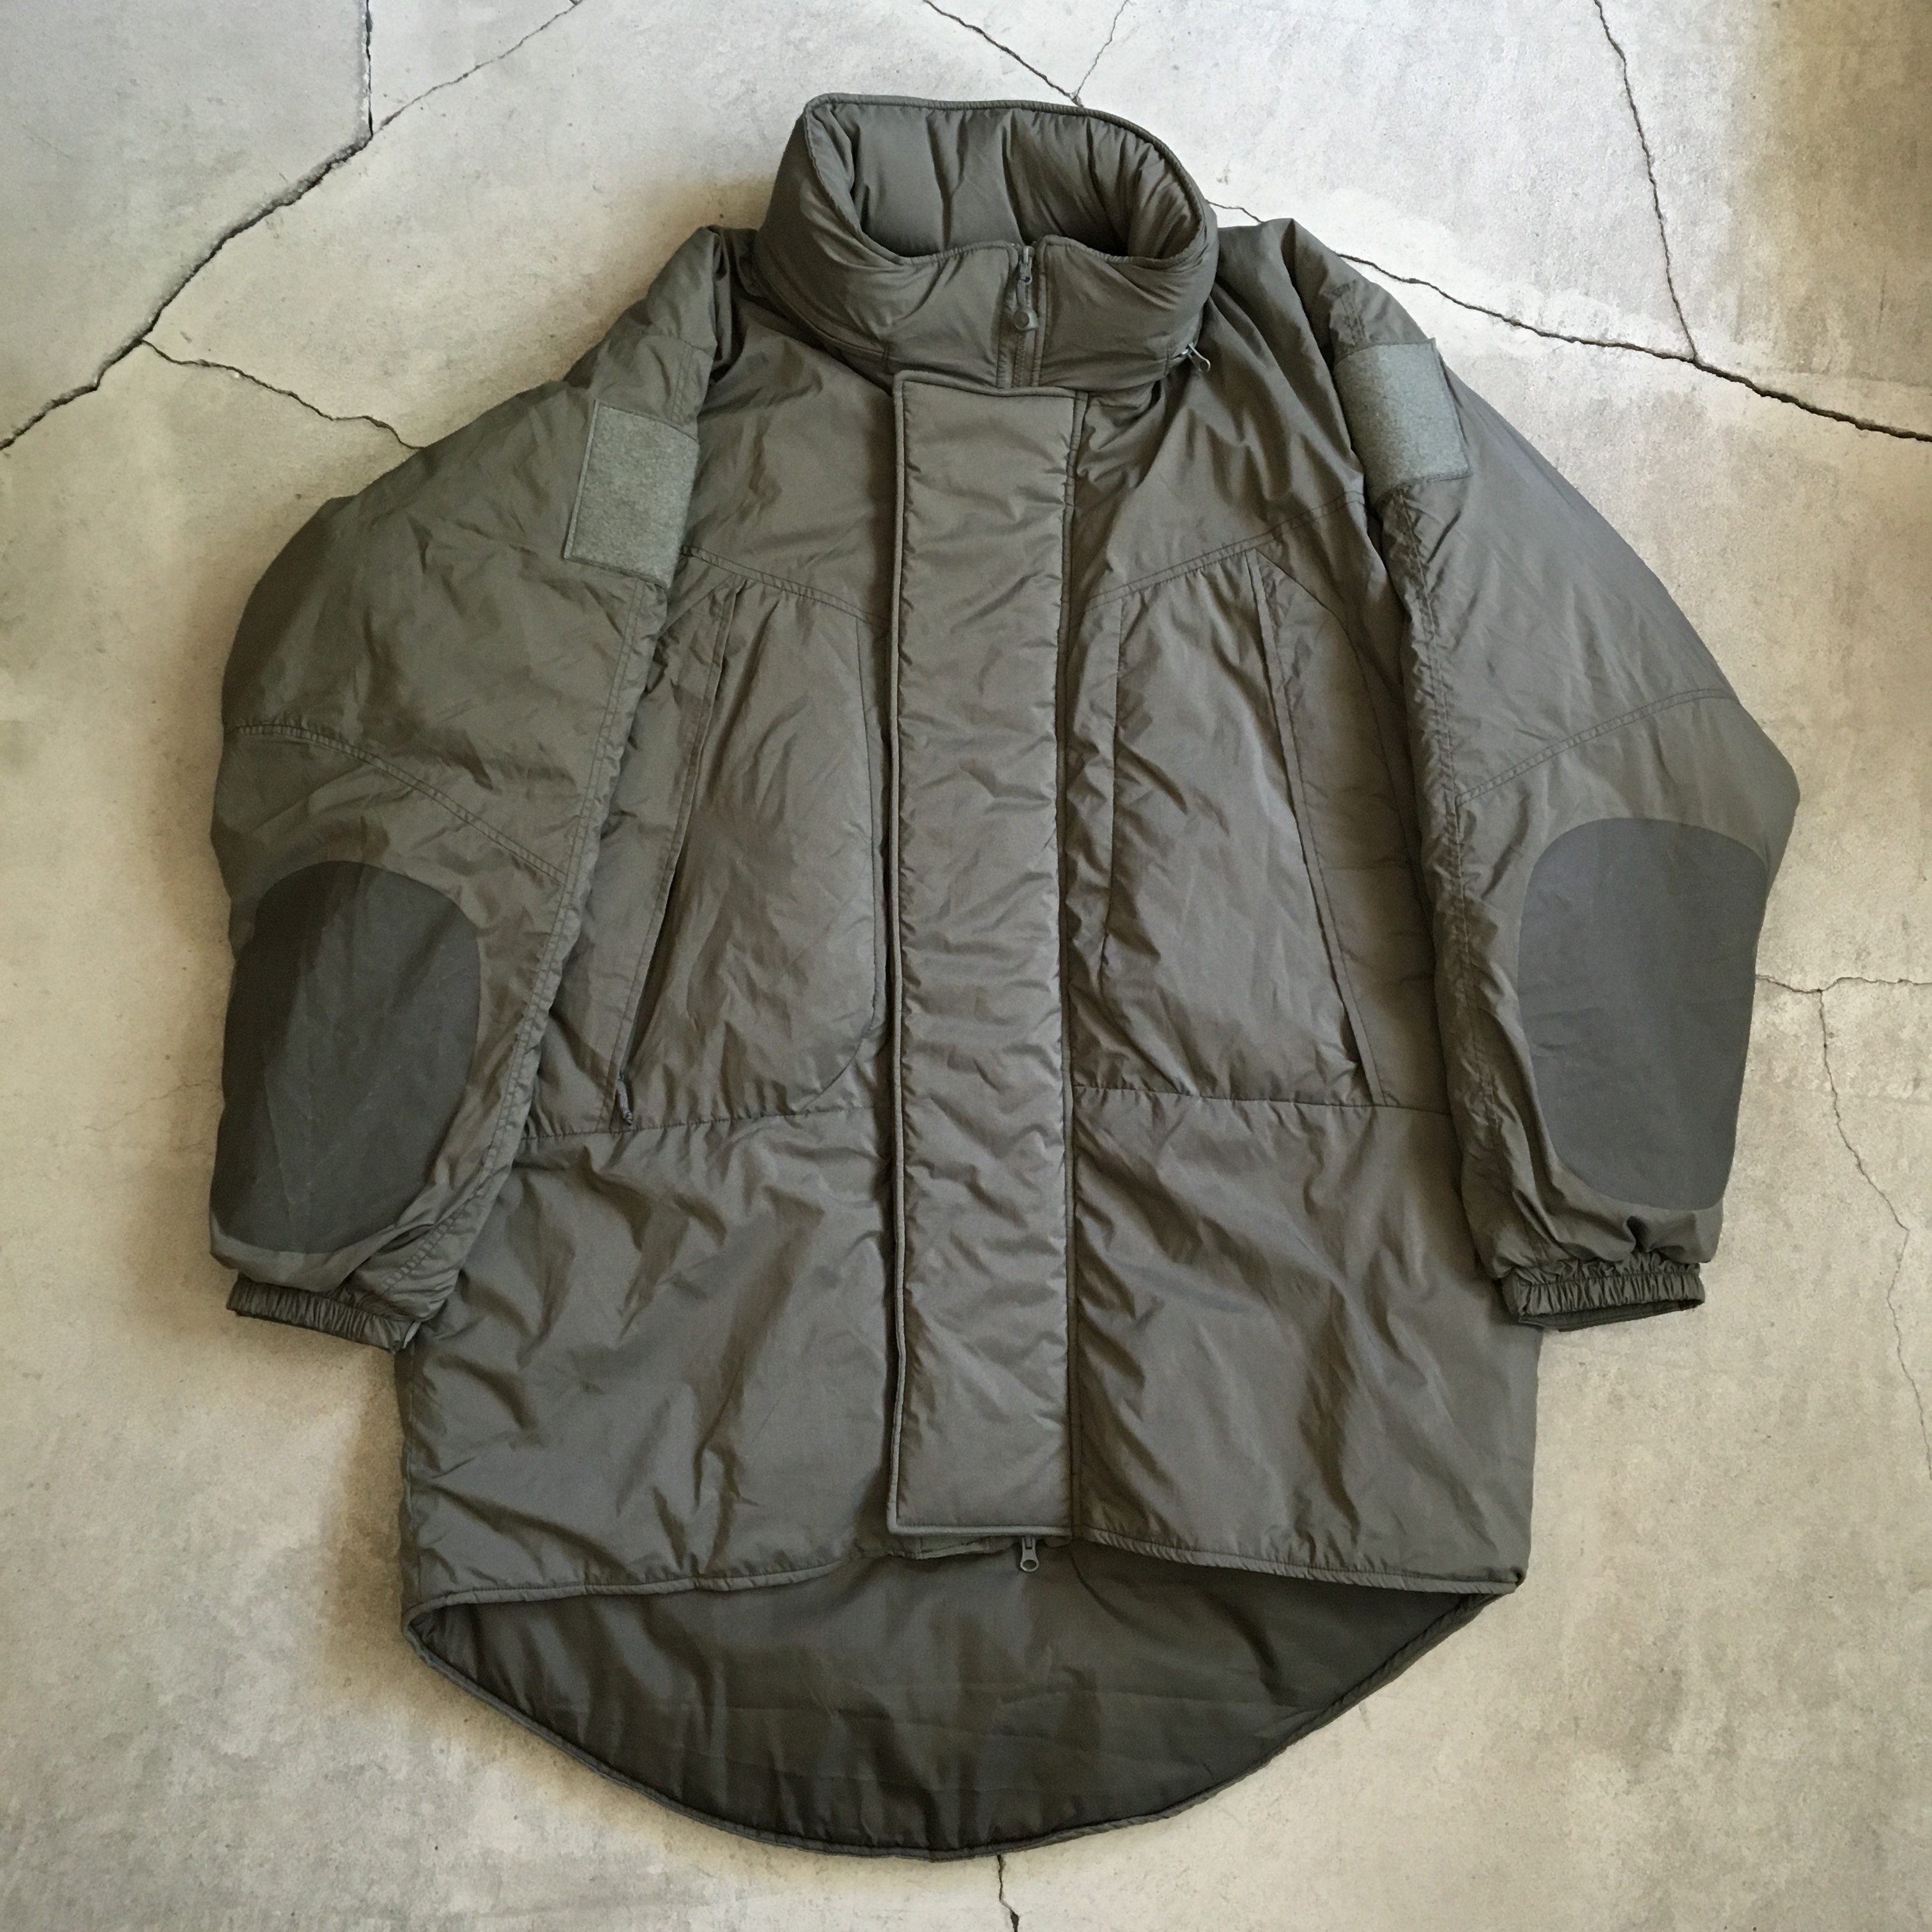 PCU LEVEL7 TYPE-2 Extreme Cold Weather Parka (dead stock from 2006